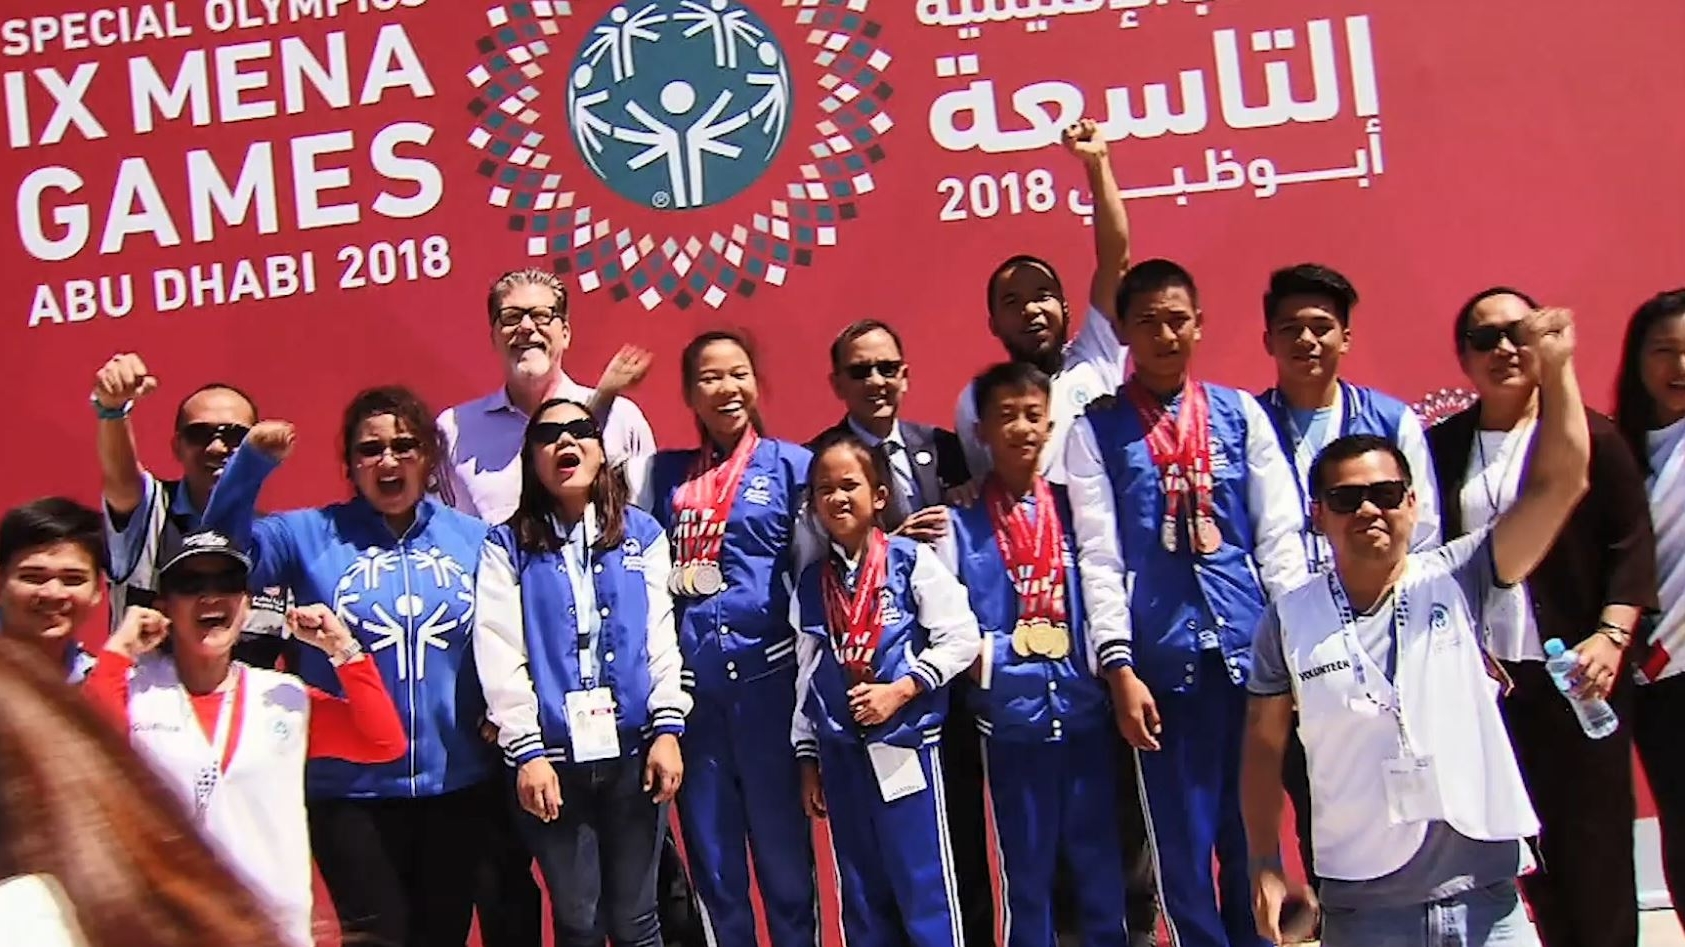 Abu Dhabi a good host for Special Olympics World Games